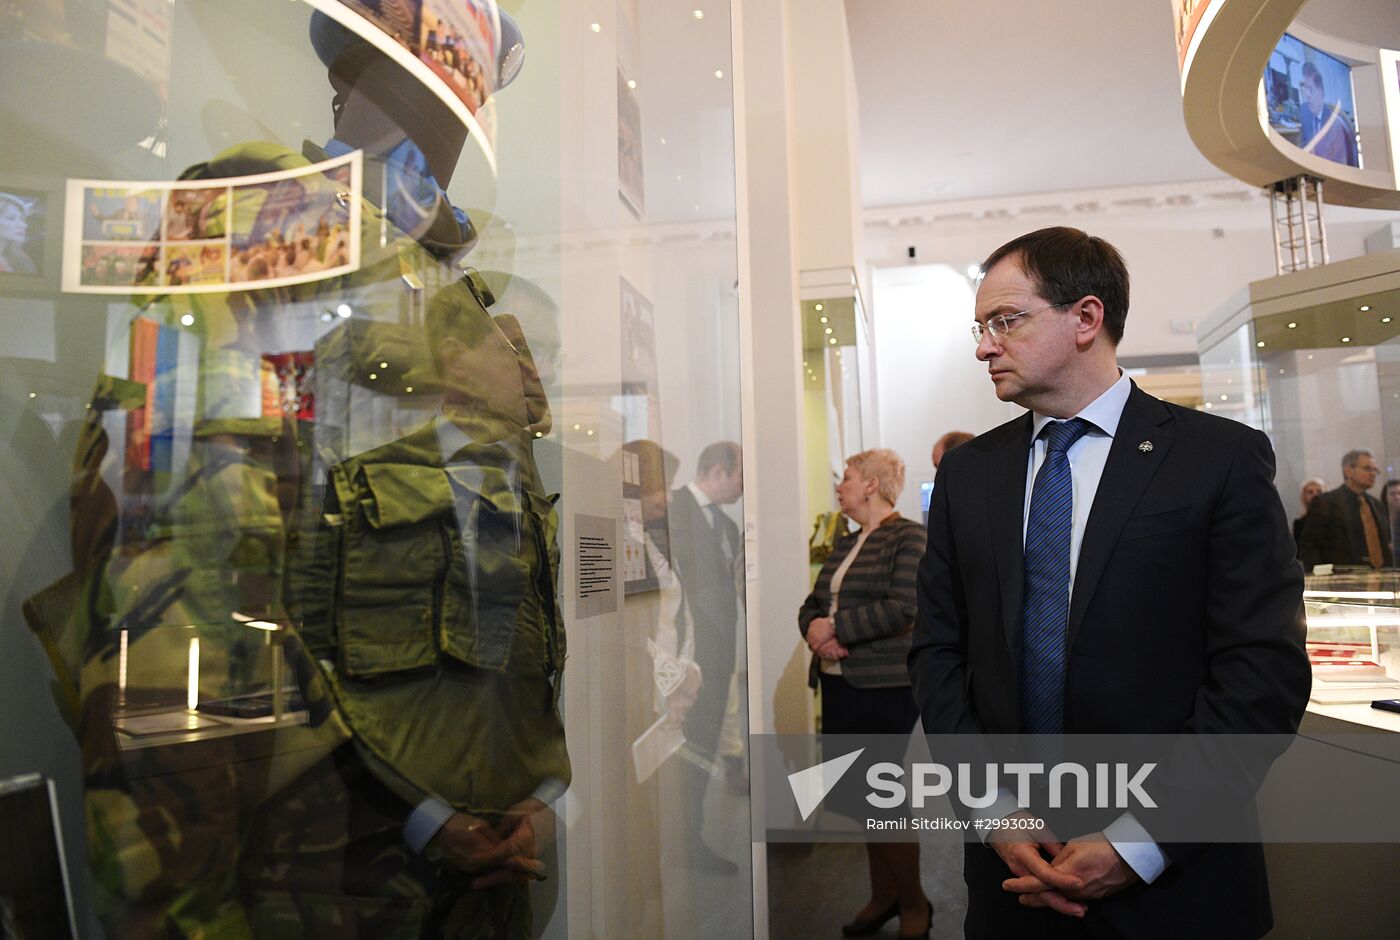 Exhibition "Russia 21st Century: Challenges and Priorities"